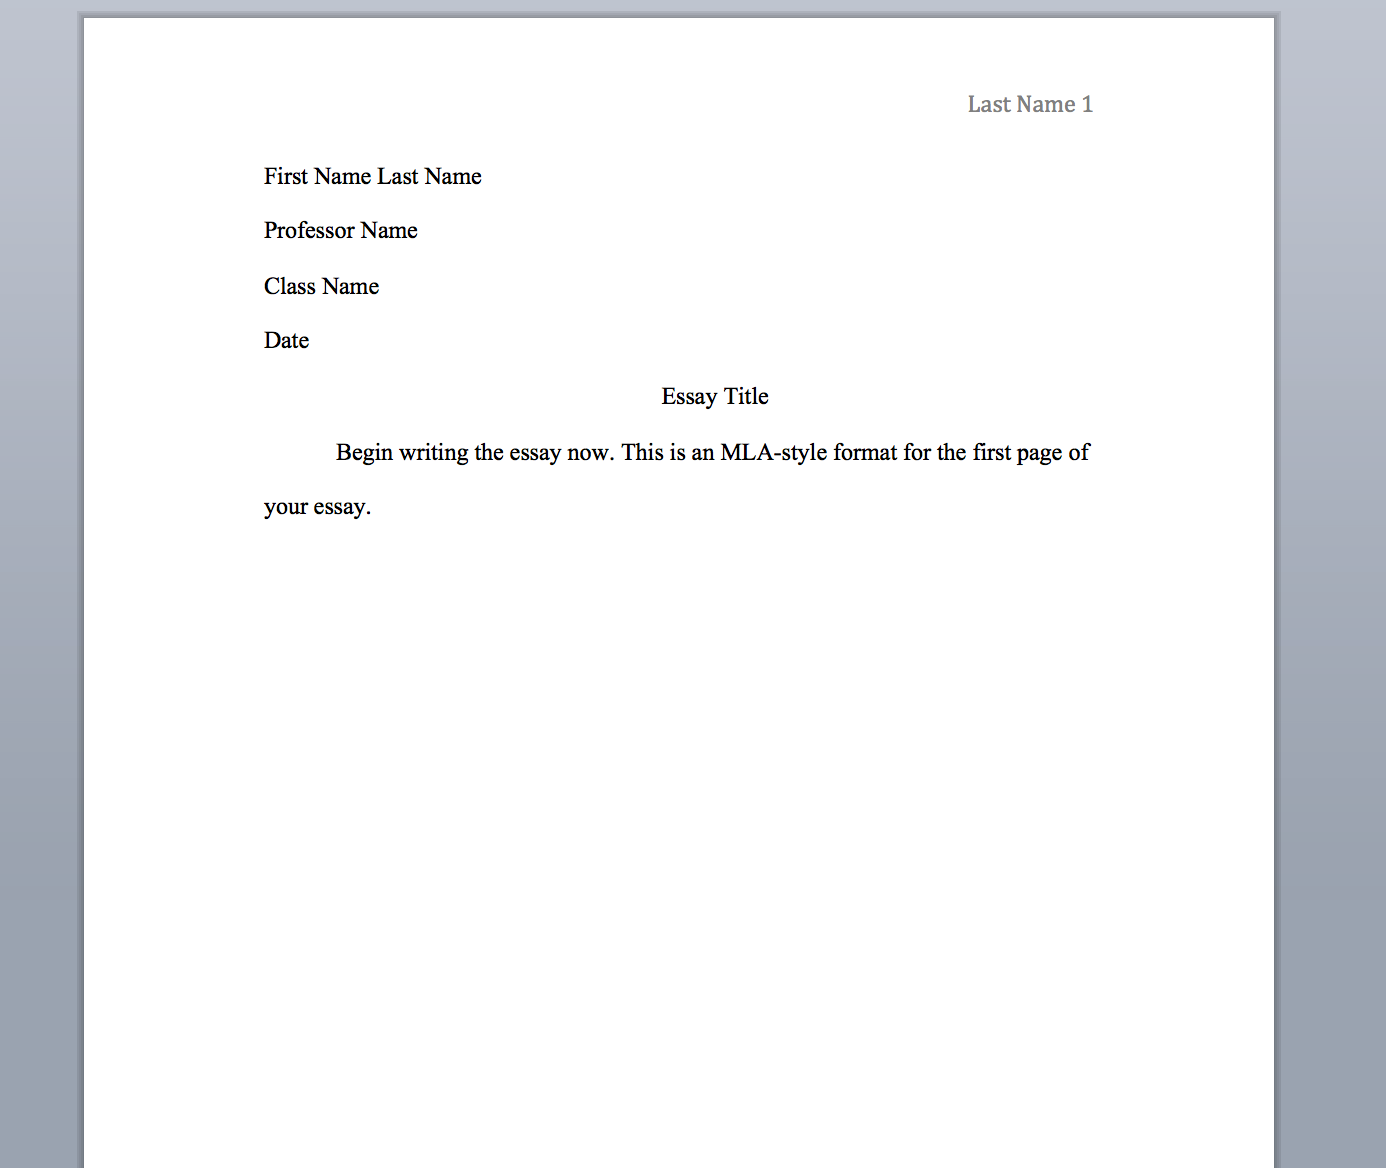 font size for my essay